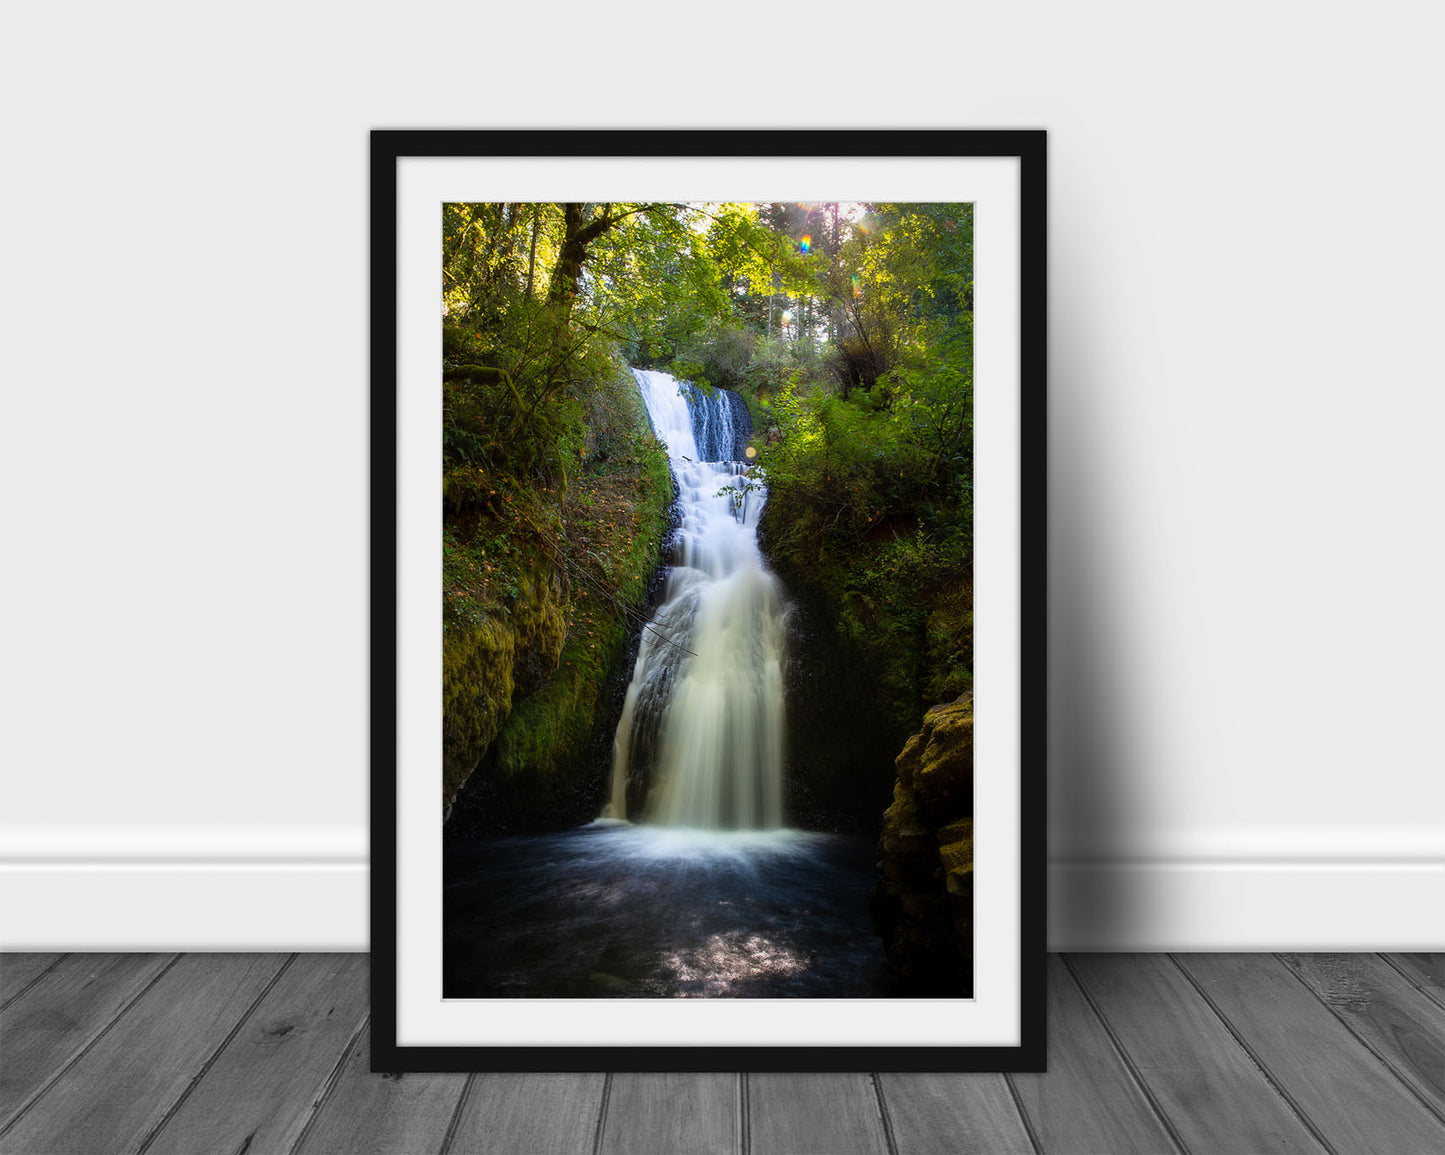 Vertical framed waterfall print of Bridal Veil Falls on a summer day in the Columbia River Gorge in Oregon by Sean Ramsey of Southern Plains Photography.